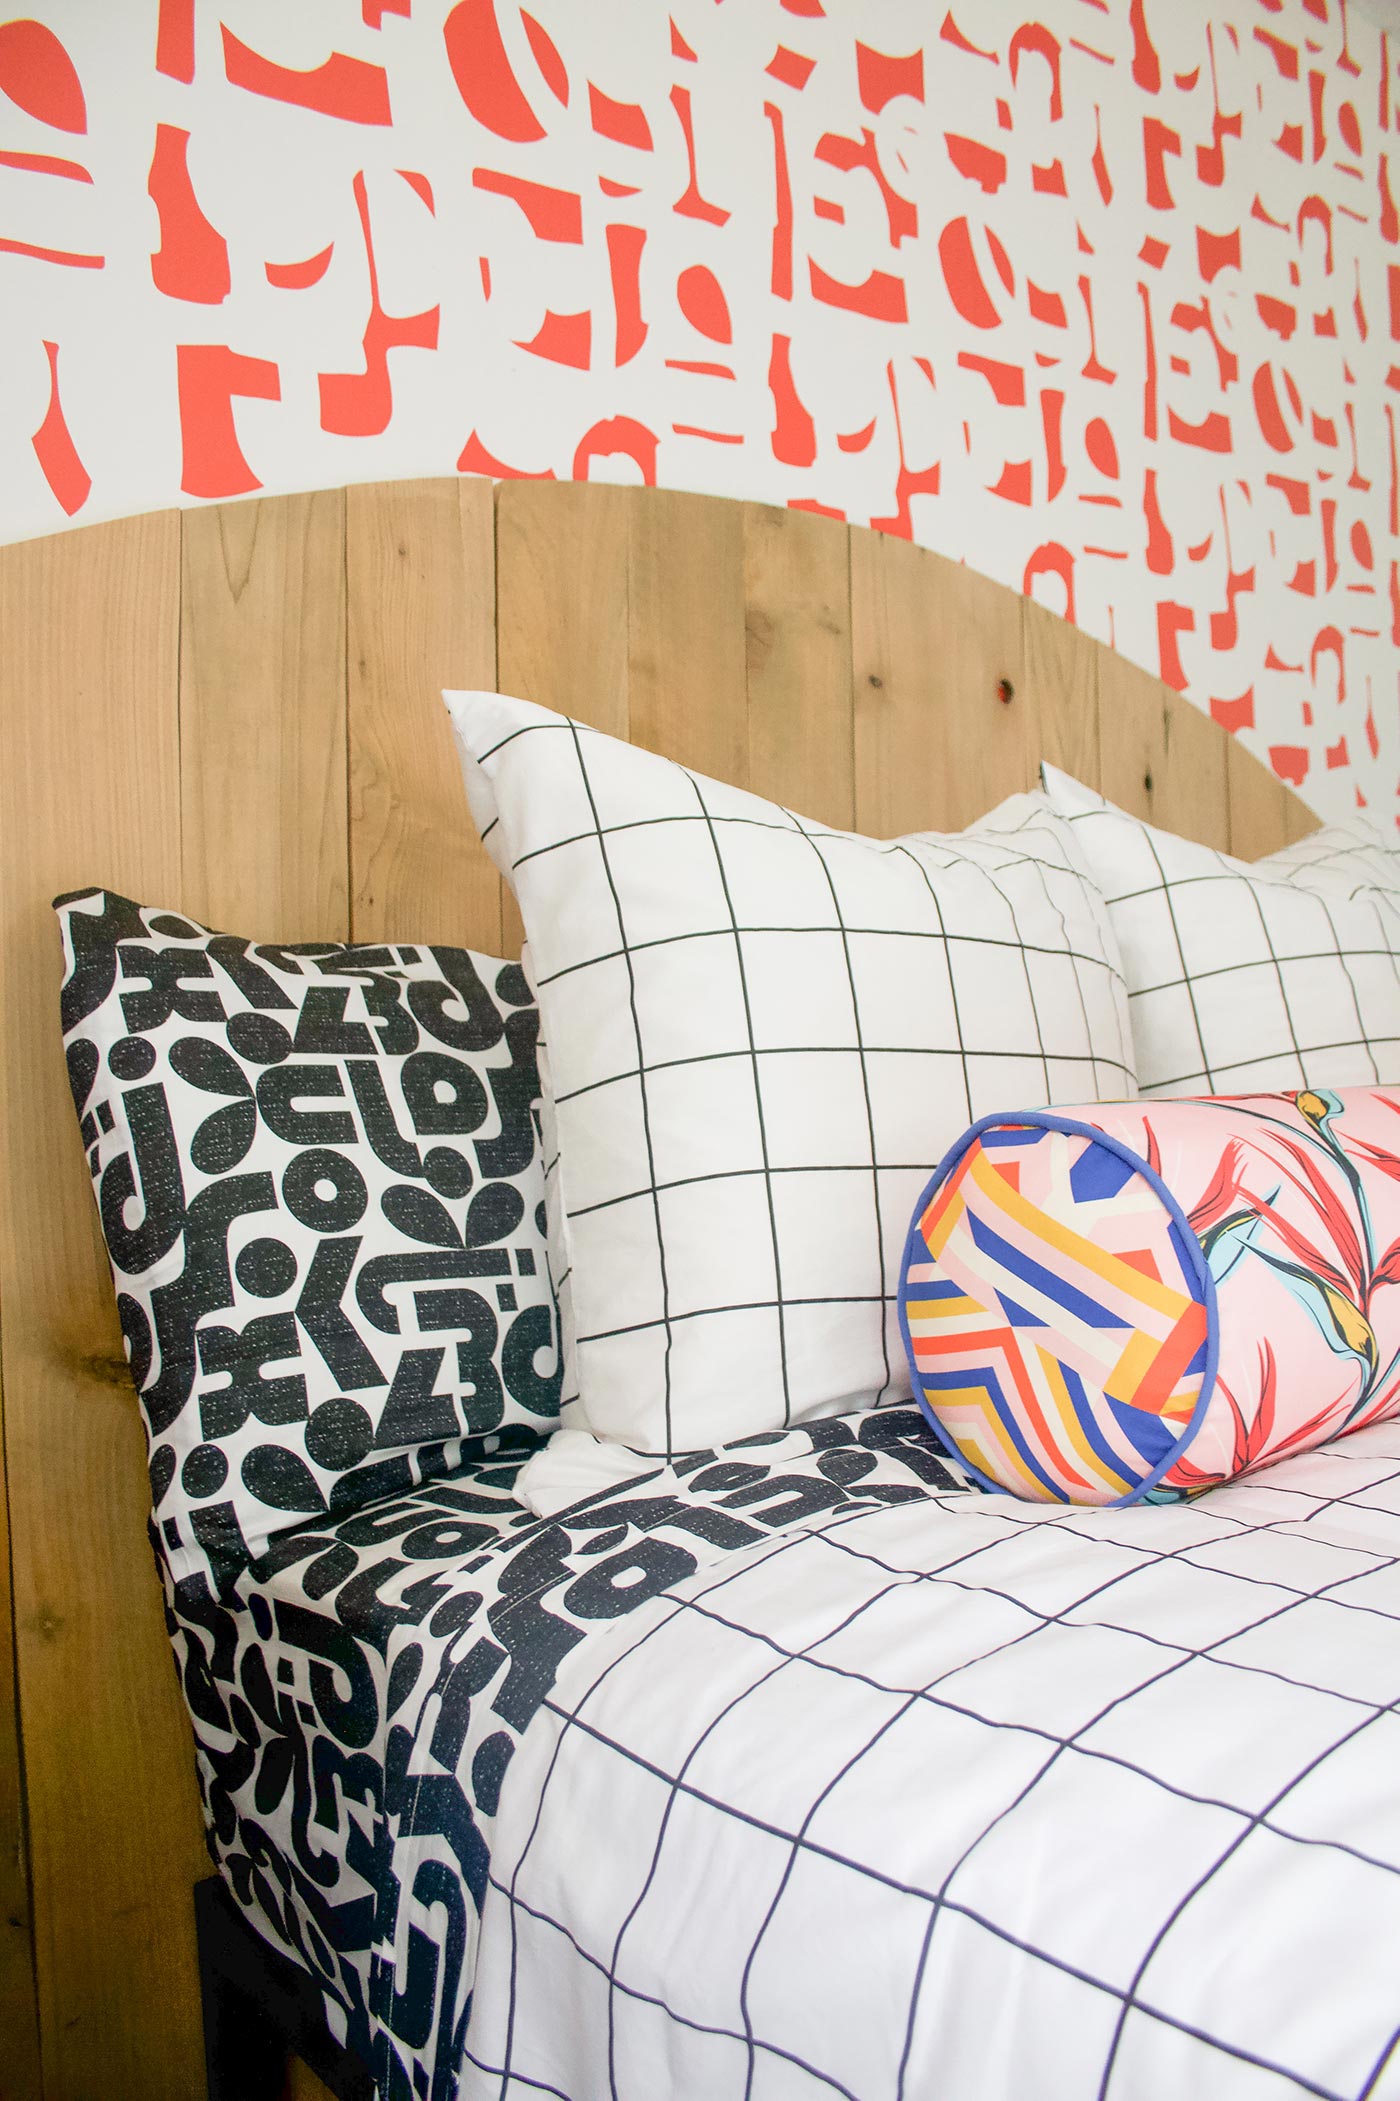 How to mix and match patterns and colors with spoonflower in the bedroom